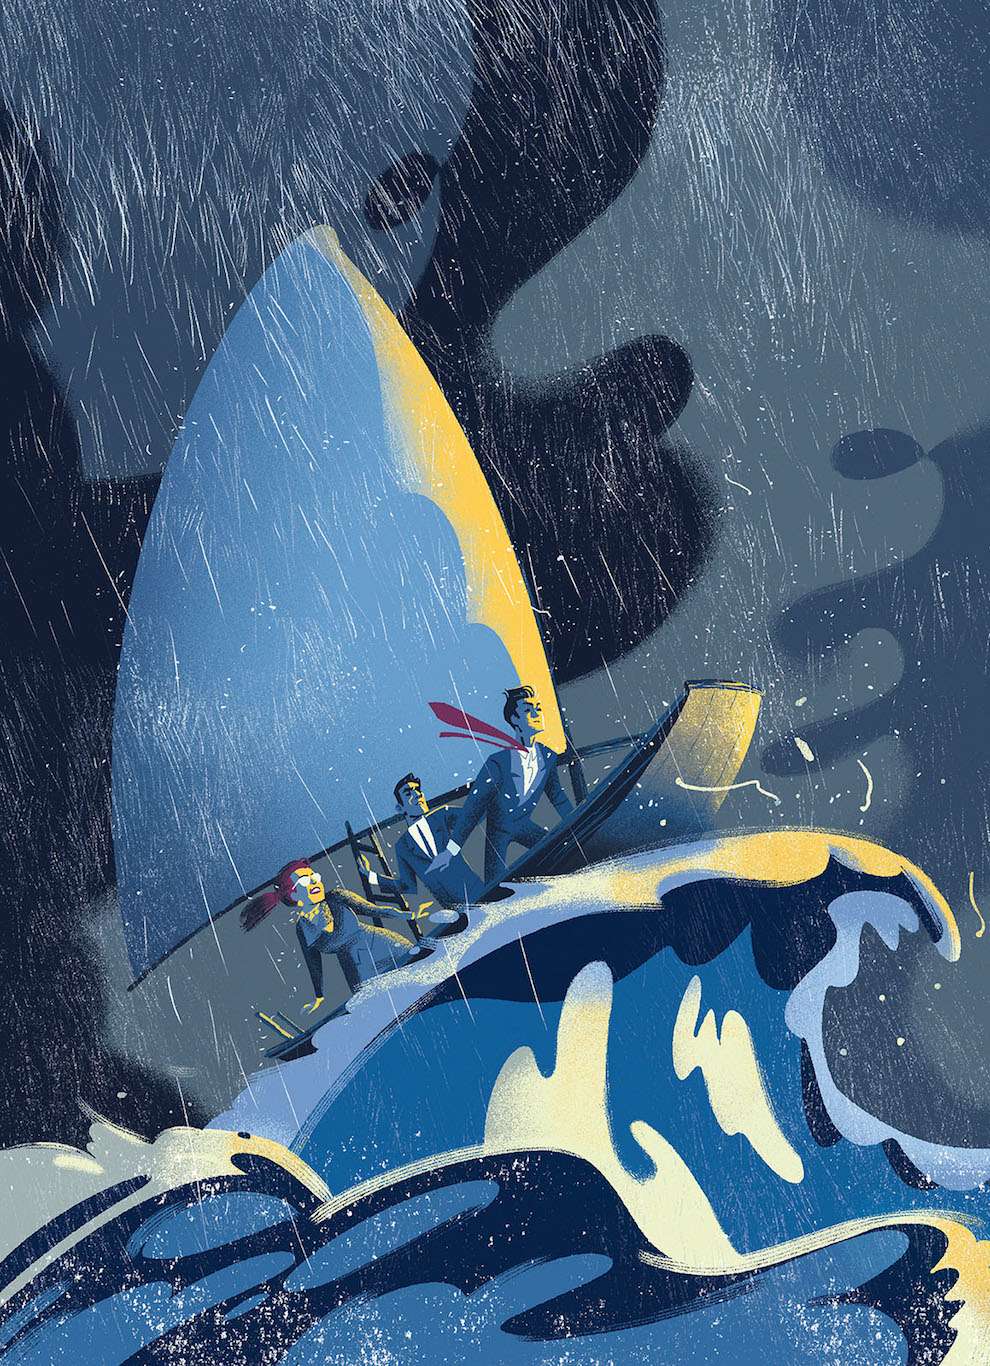 Jan Bielecki, Digital editorial piece about navigating in troubled waters. Business looking people in a boat going through a storm 